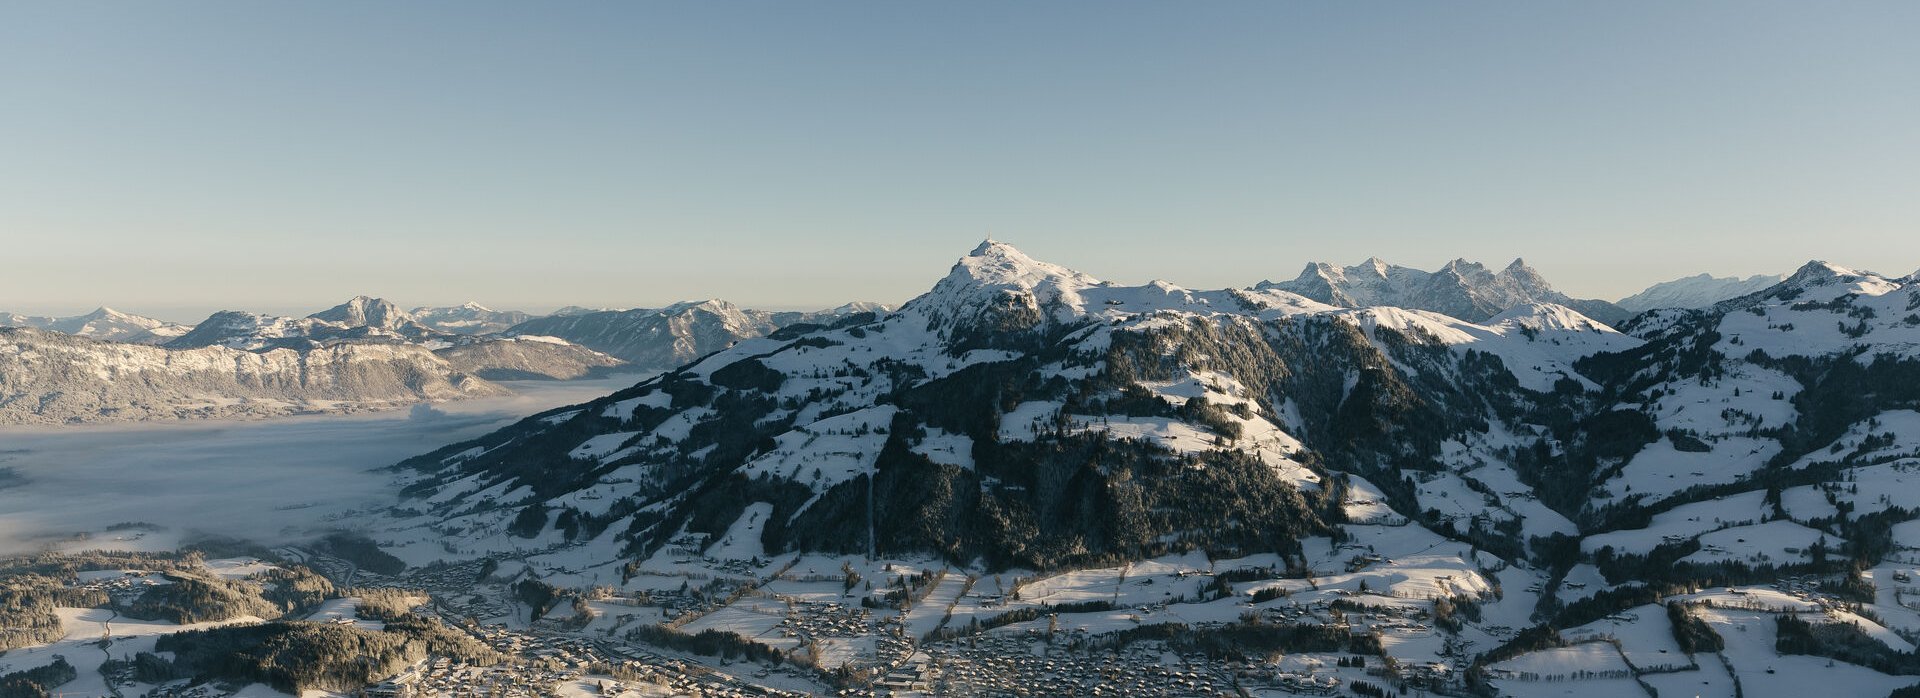 Kitzbühel landscape in winter Mountains in the snow